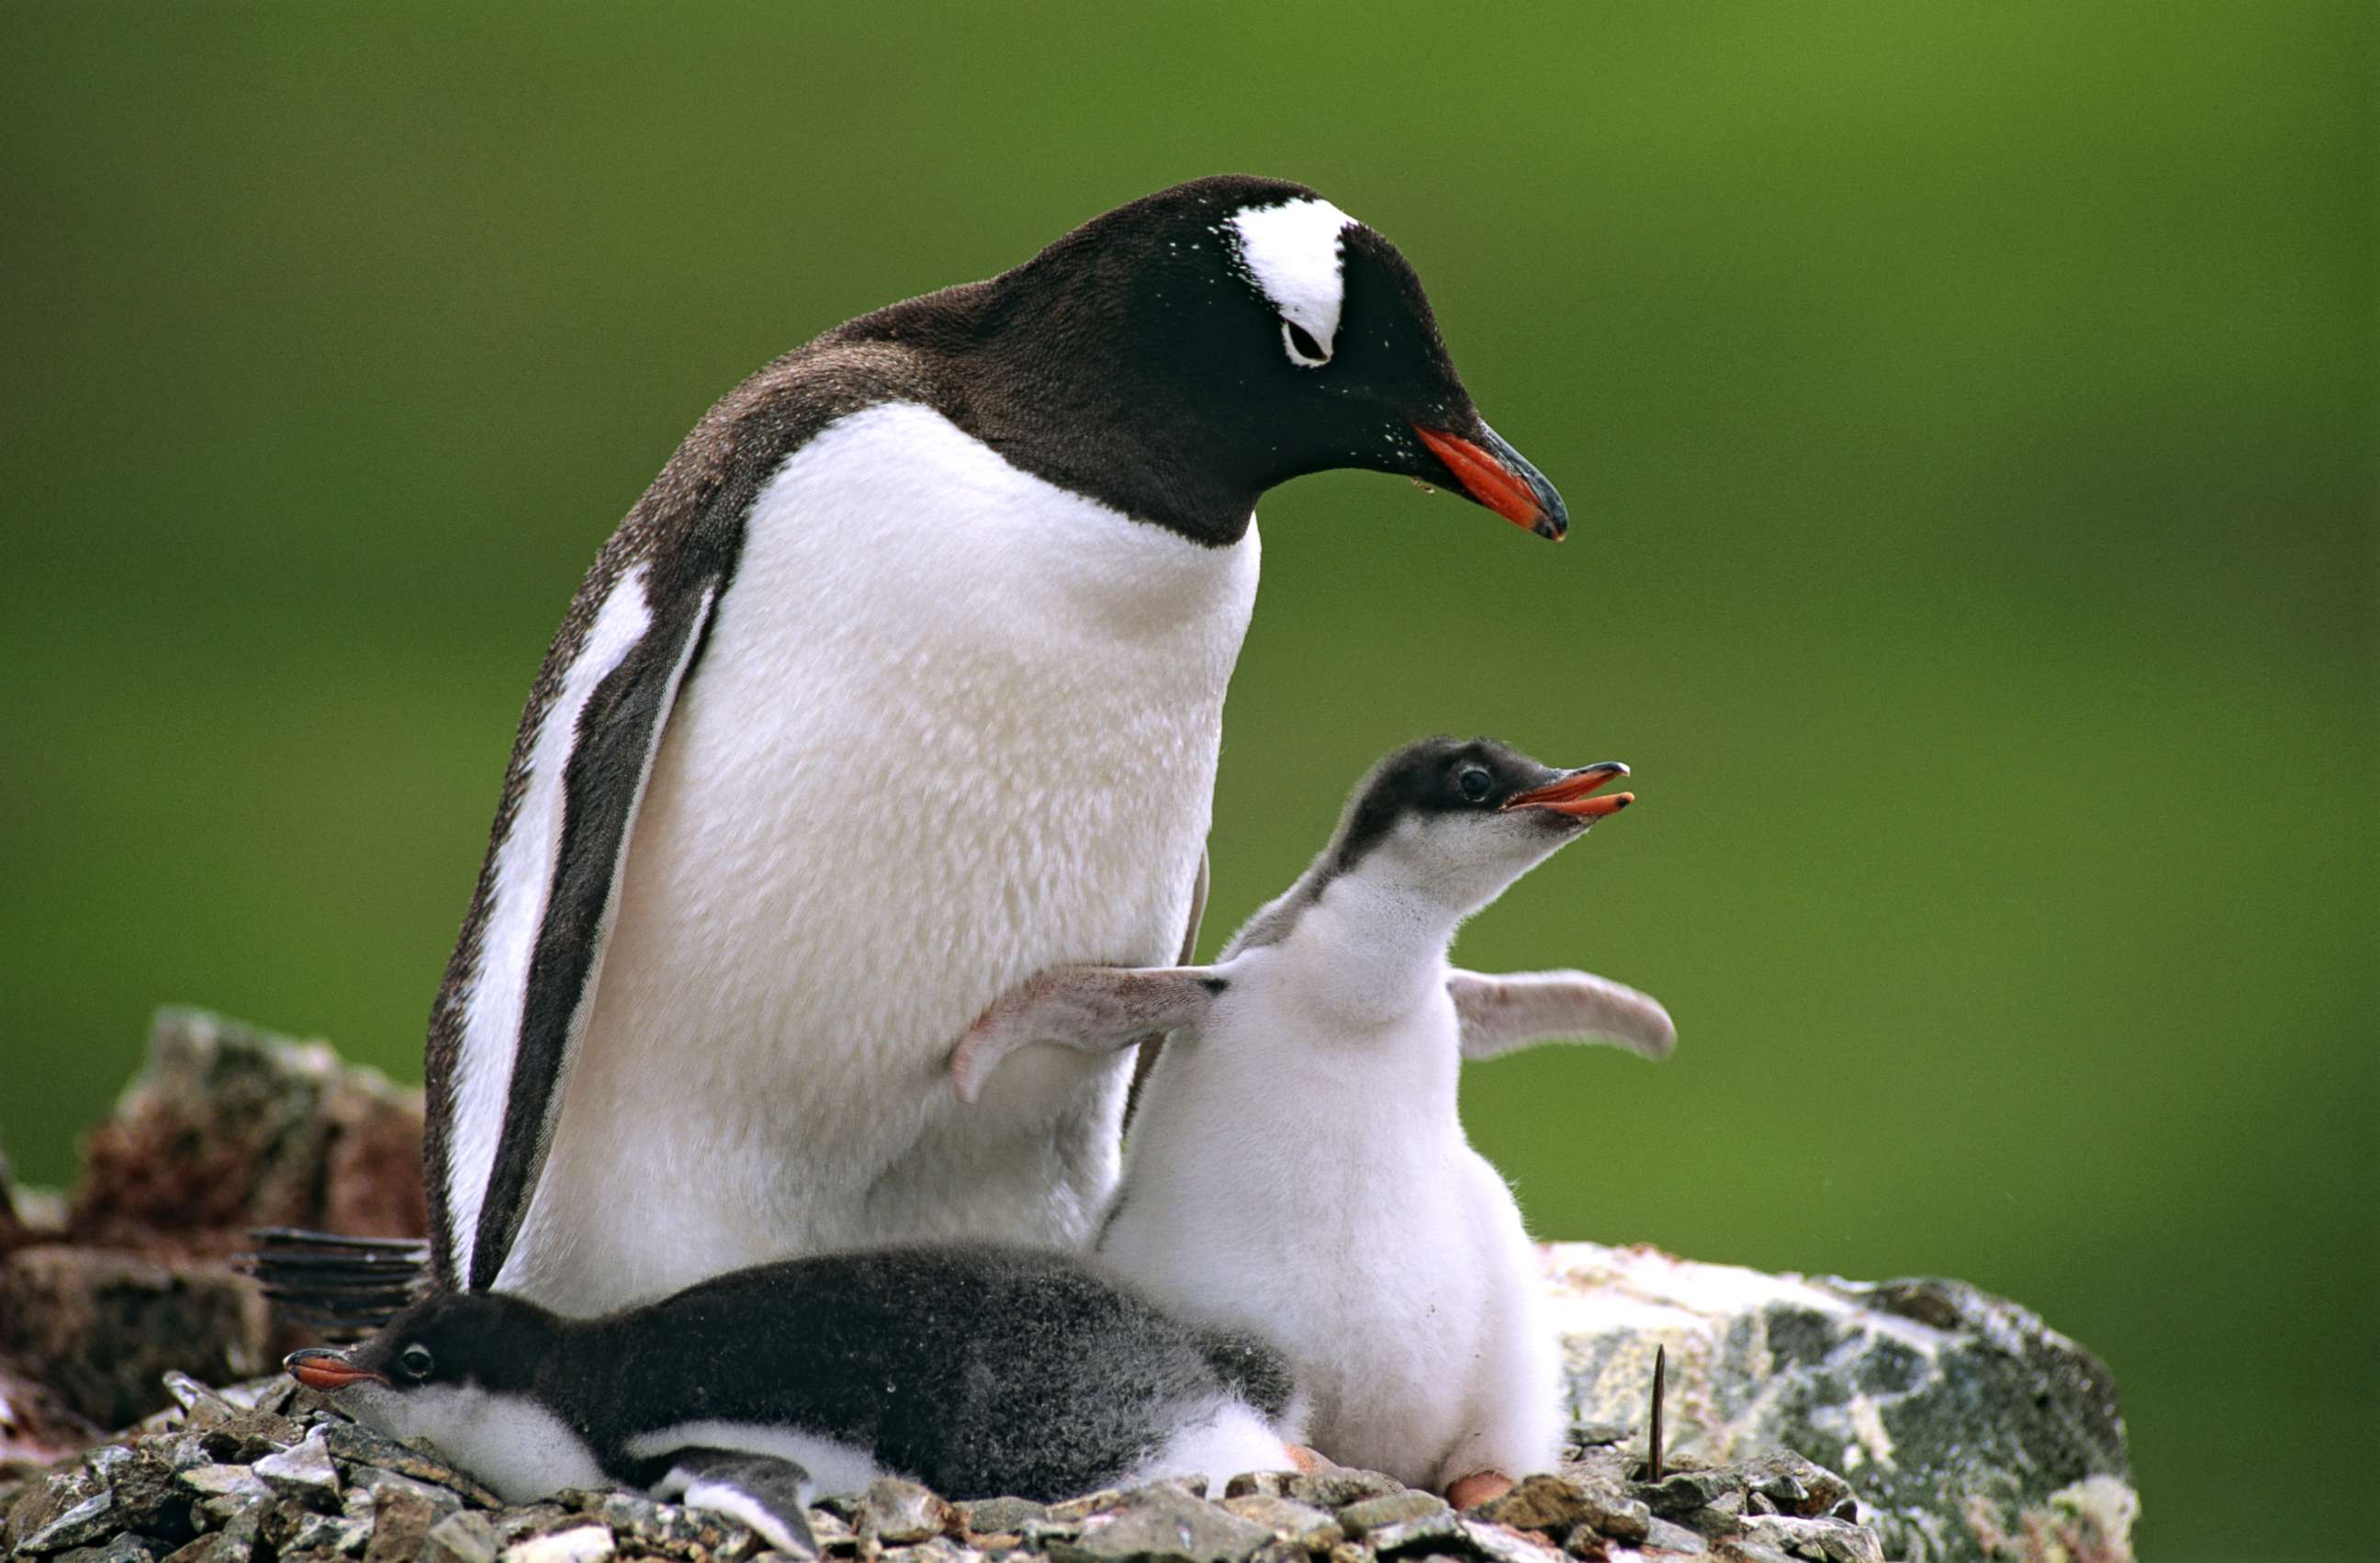 PHOTO: A Gentoo penguin (Pygoscelis papua) with its chicks in the Antarctic region, in this undated stock photo.